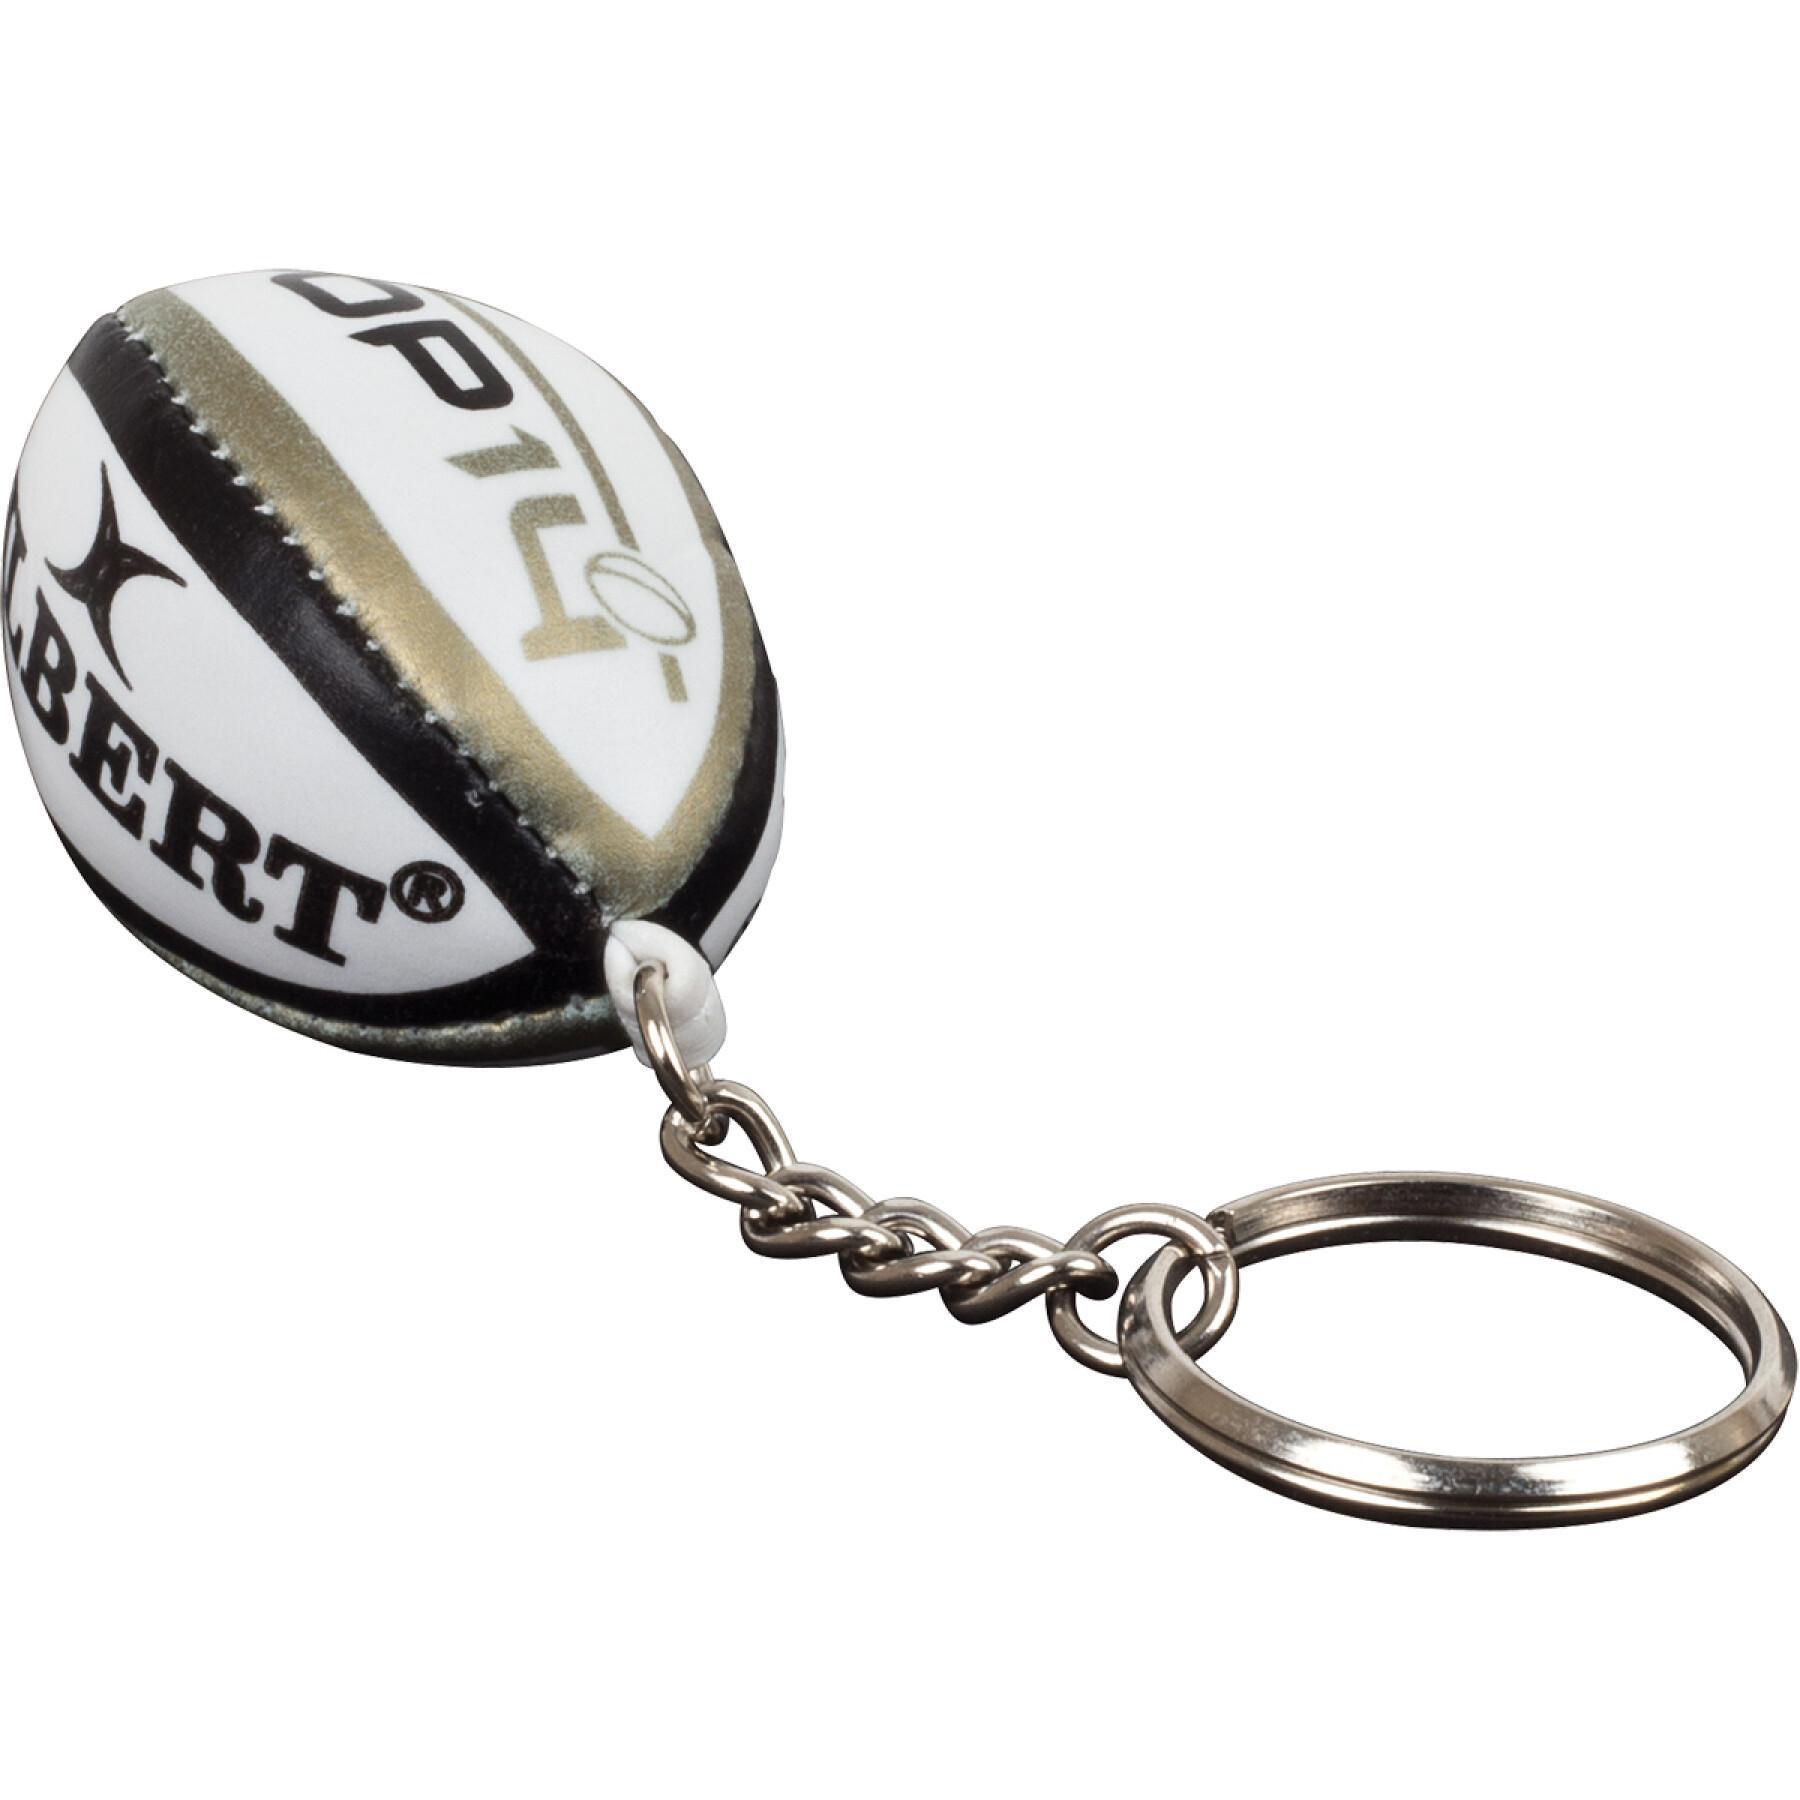 Mini-Rugbyball Gilbert Top 14 (taille 1)